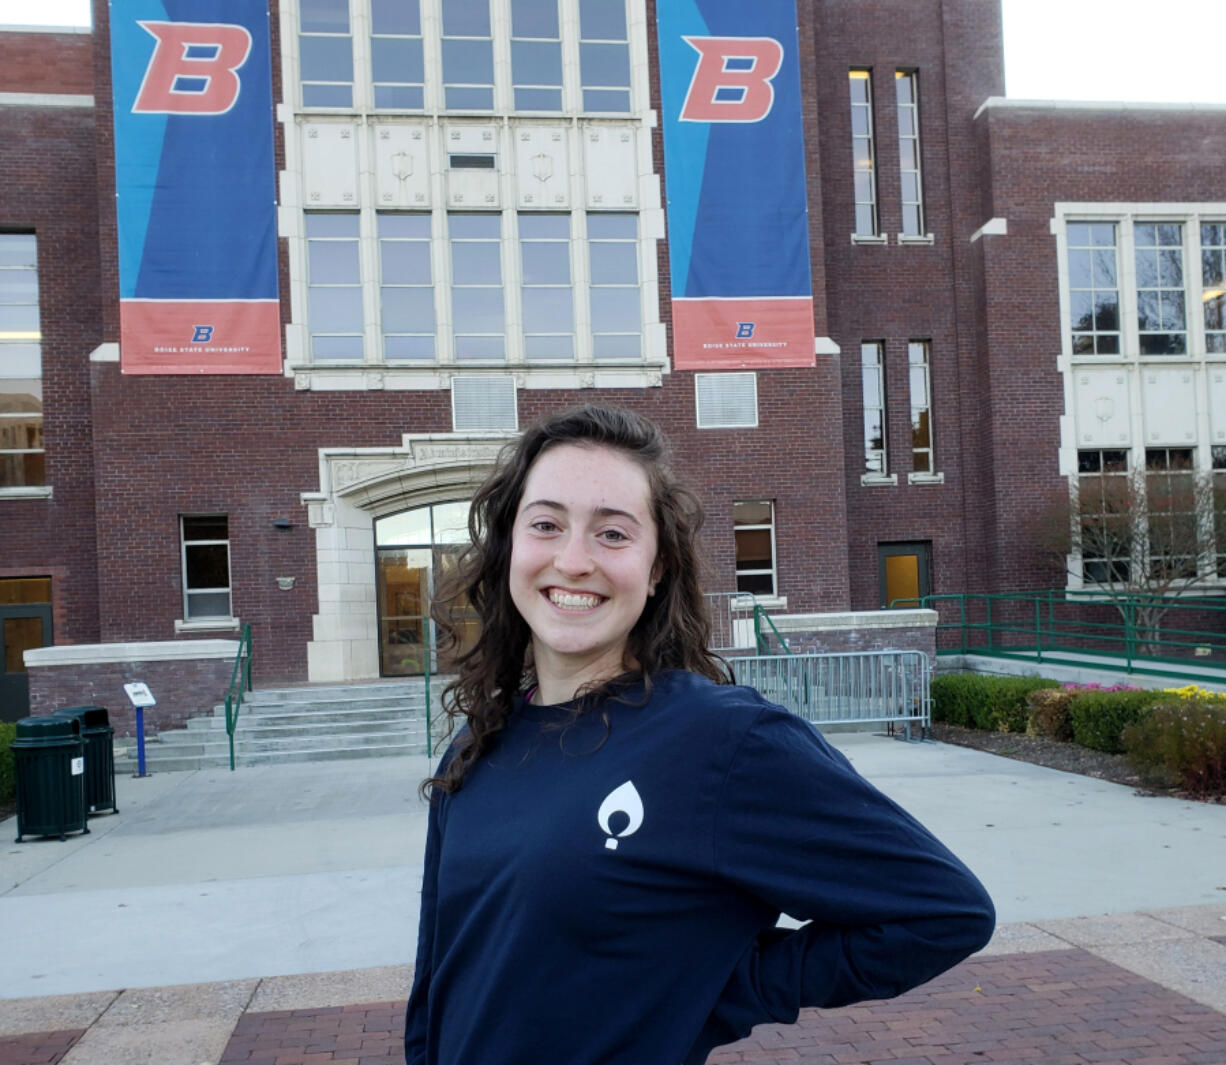 Ally Orr, 22, has raised over $100,000 for her newly founded "Women in STEM, Medicine and Law Scholarship" at Boise State University. The scholarship was created after a professor at the school made a series of sexist remarks at a national convention, sparking outrage among students on campus.